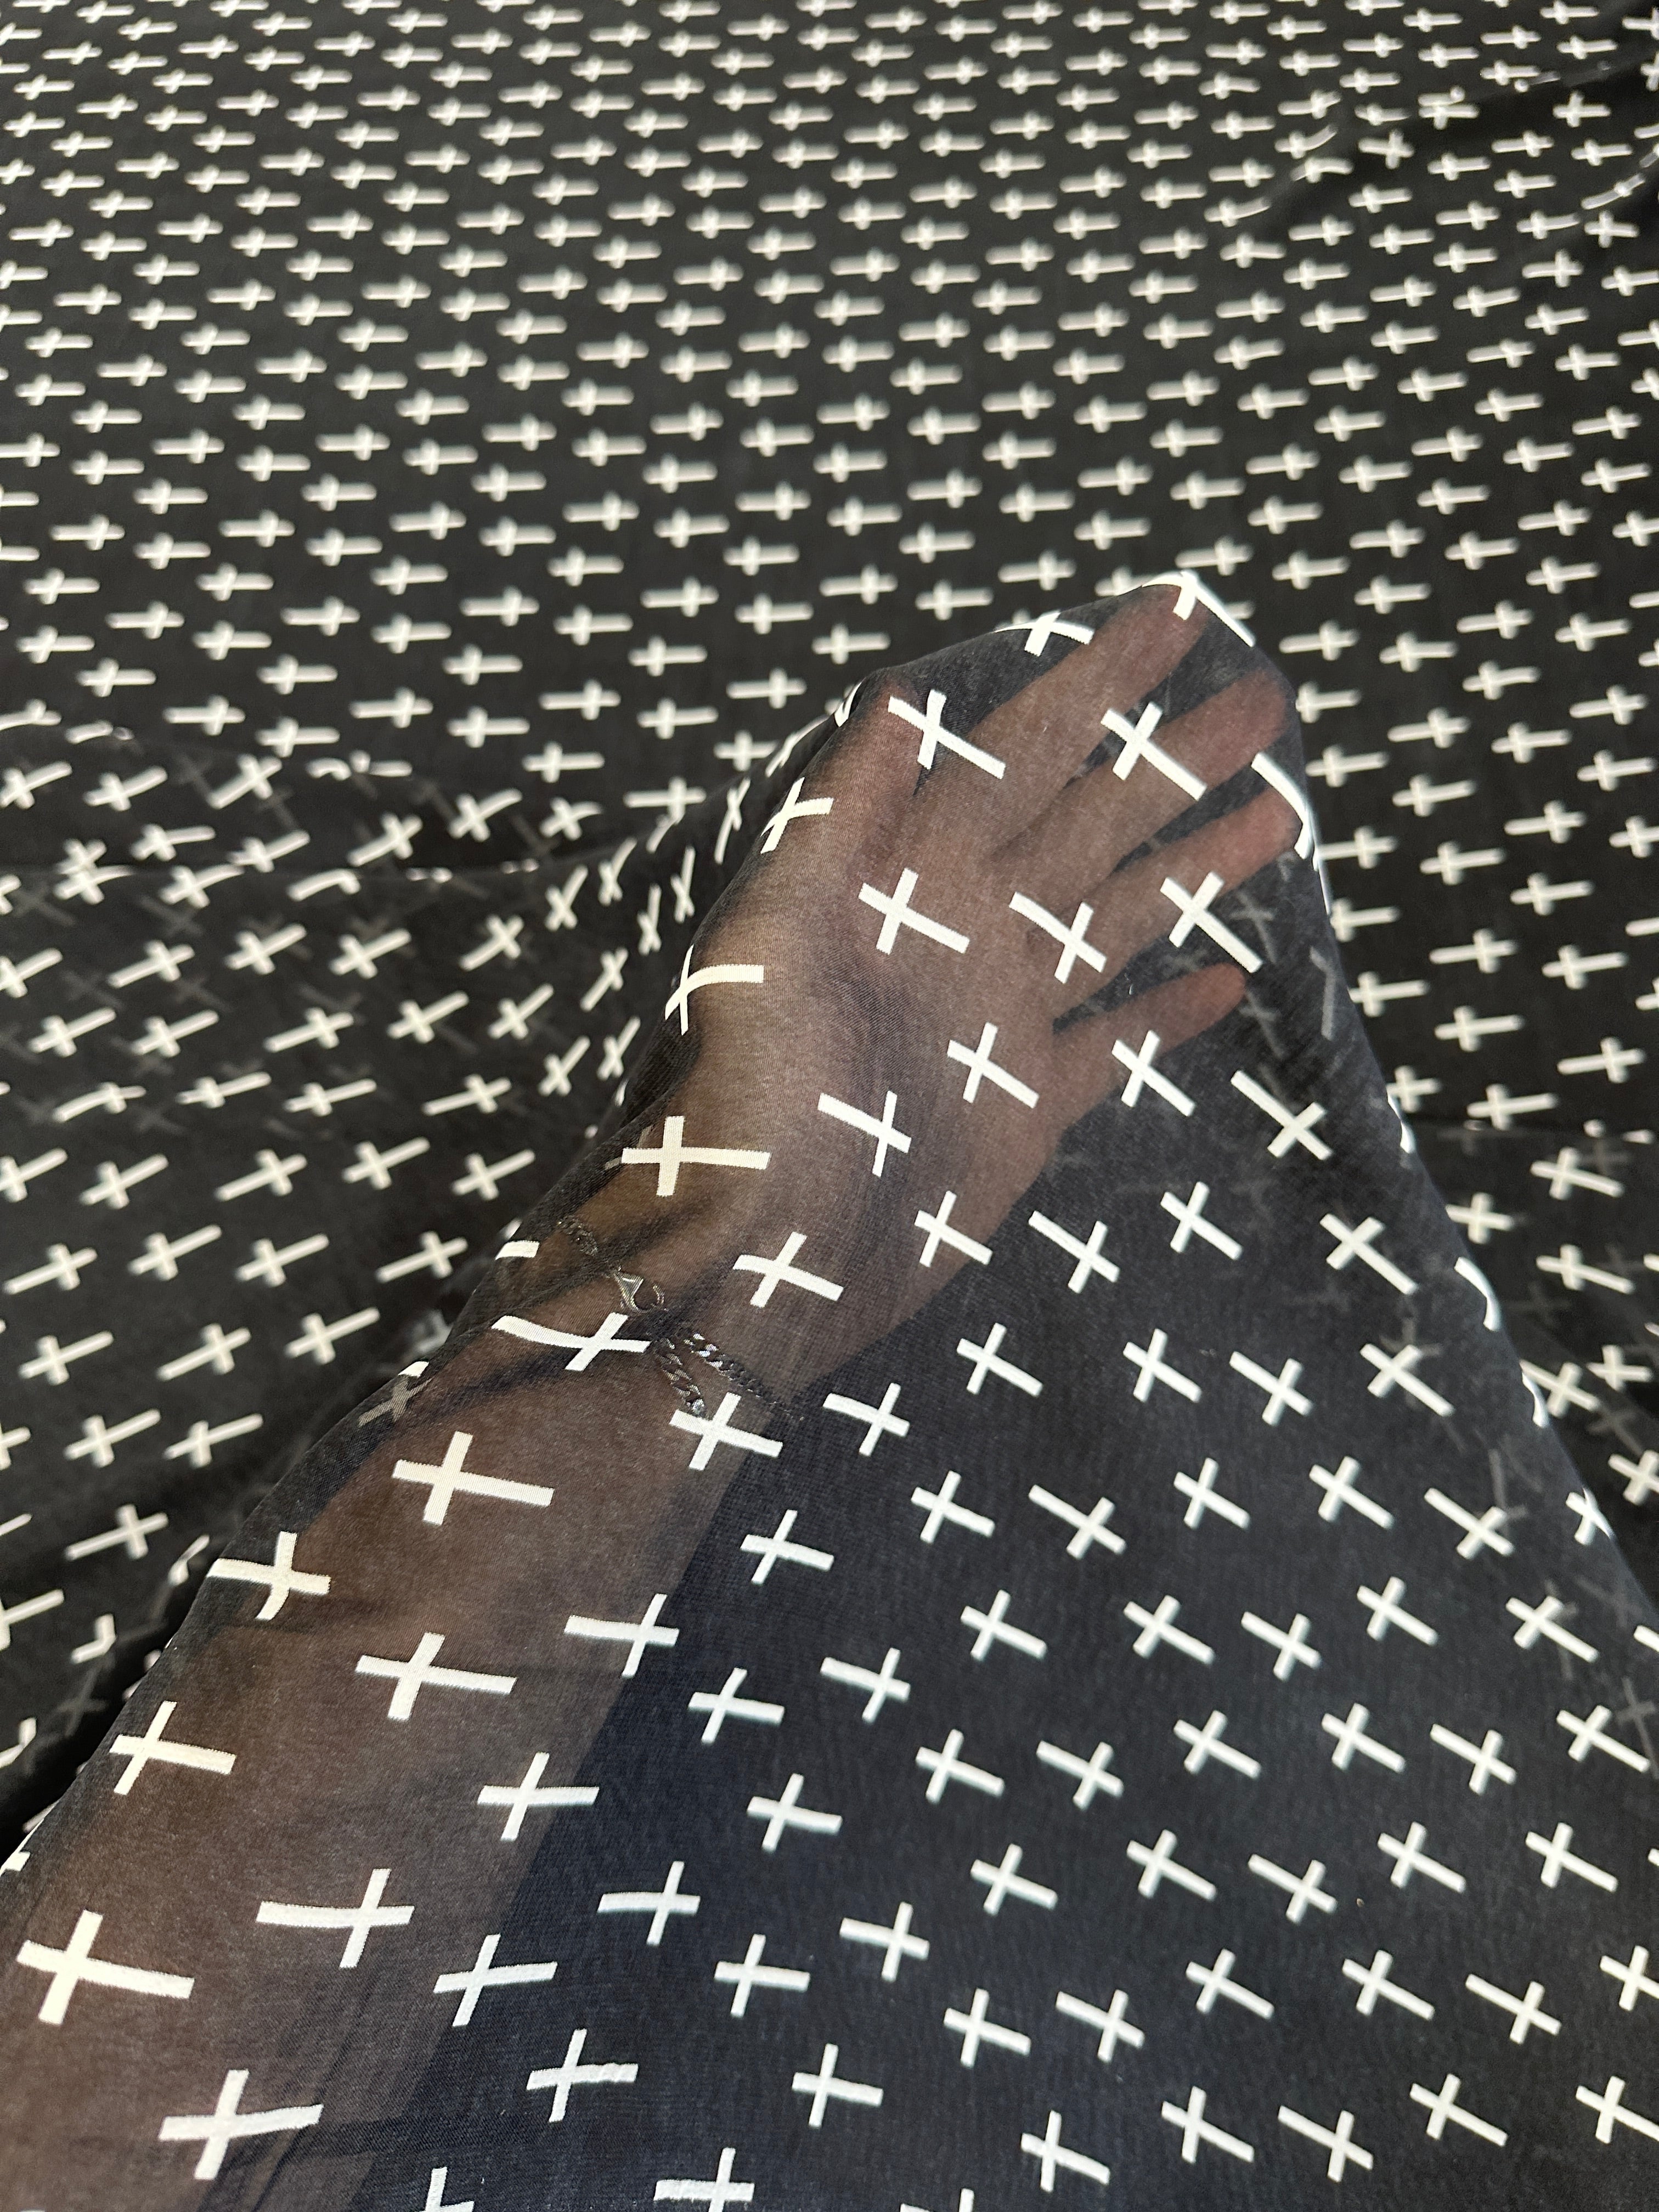 Black and White Cross Print Chiffon, online textile store, sewing, fabric store, sewing store, cheap fabric store, kiki textiles